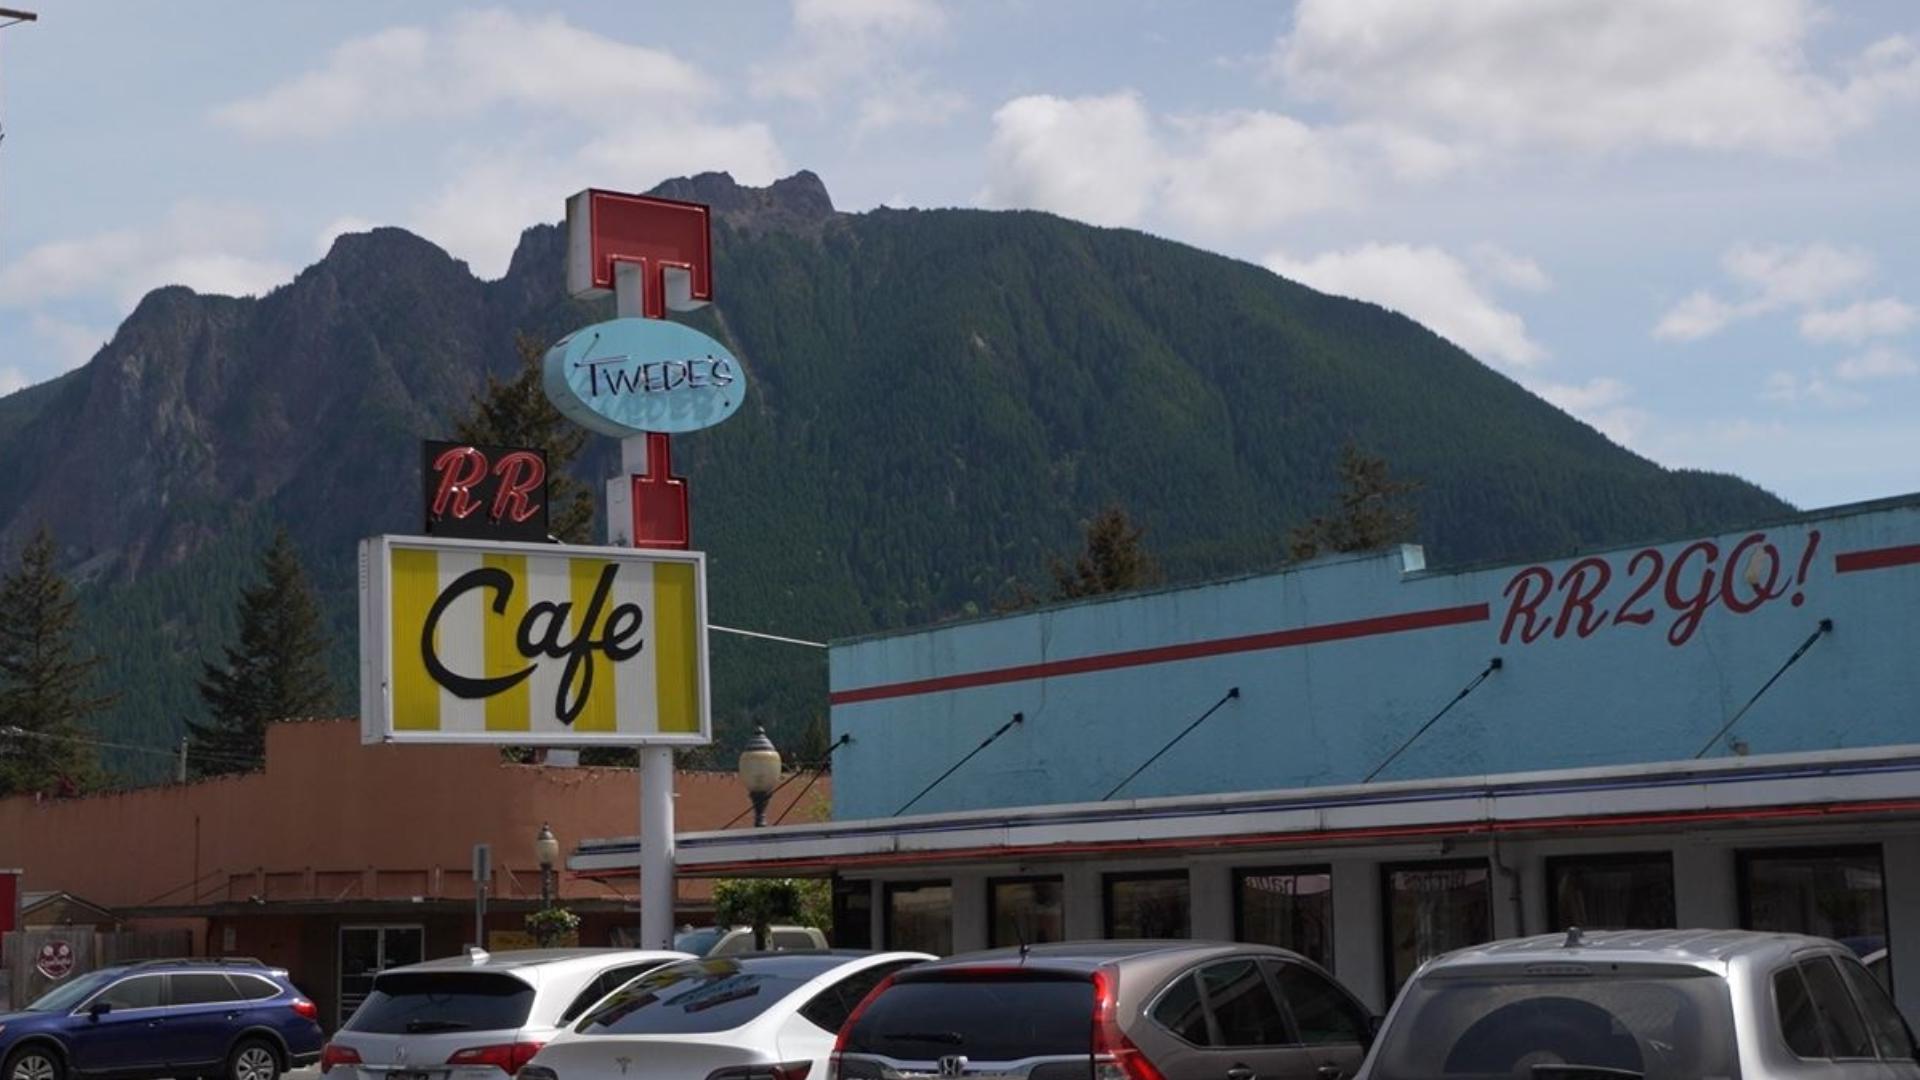 Twede's Cafe first appeared in the series in 1990, and 34 years later customers still flock to the restaurant for coffee and cherry pie. #k5evening #NW90s